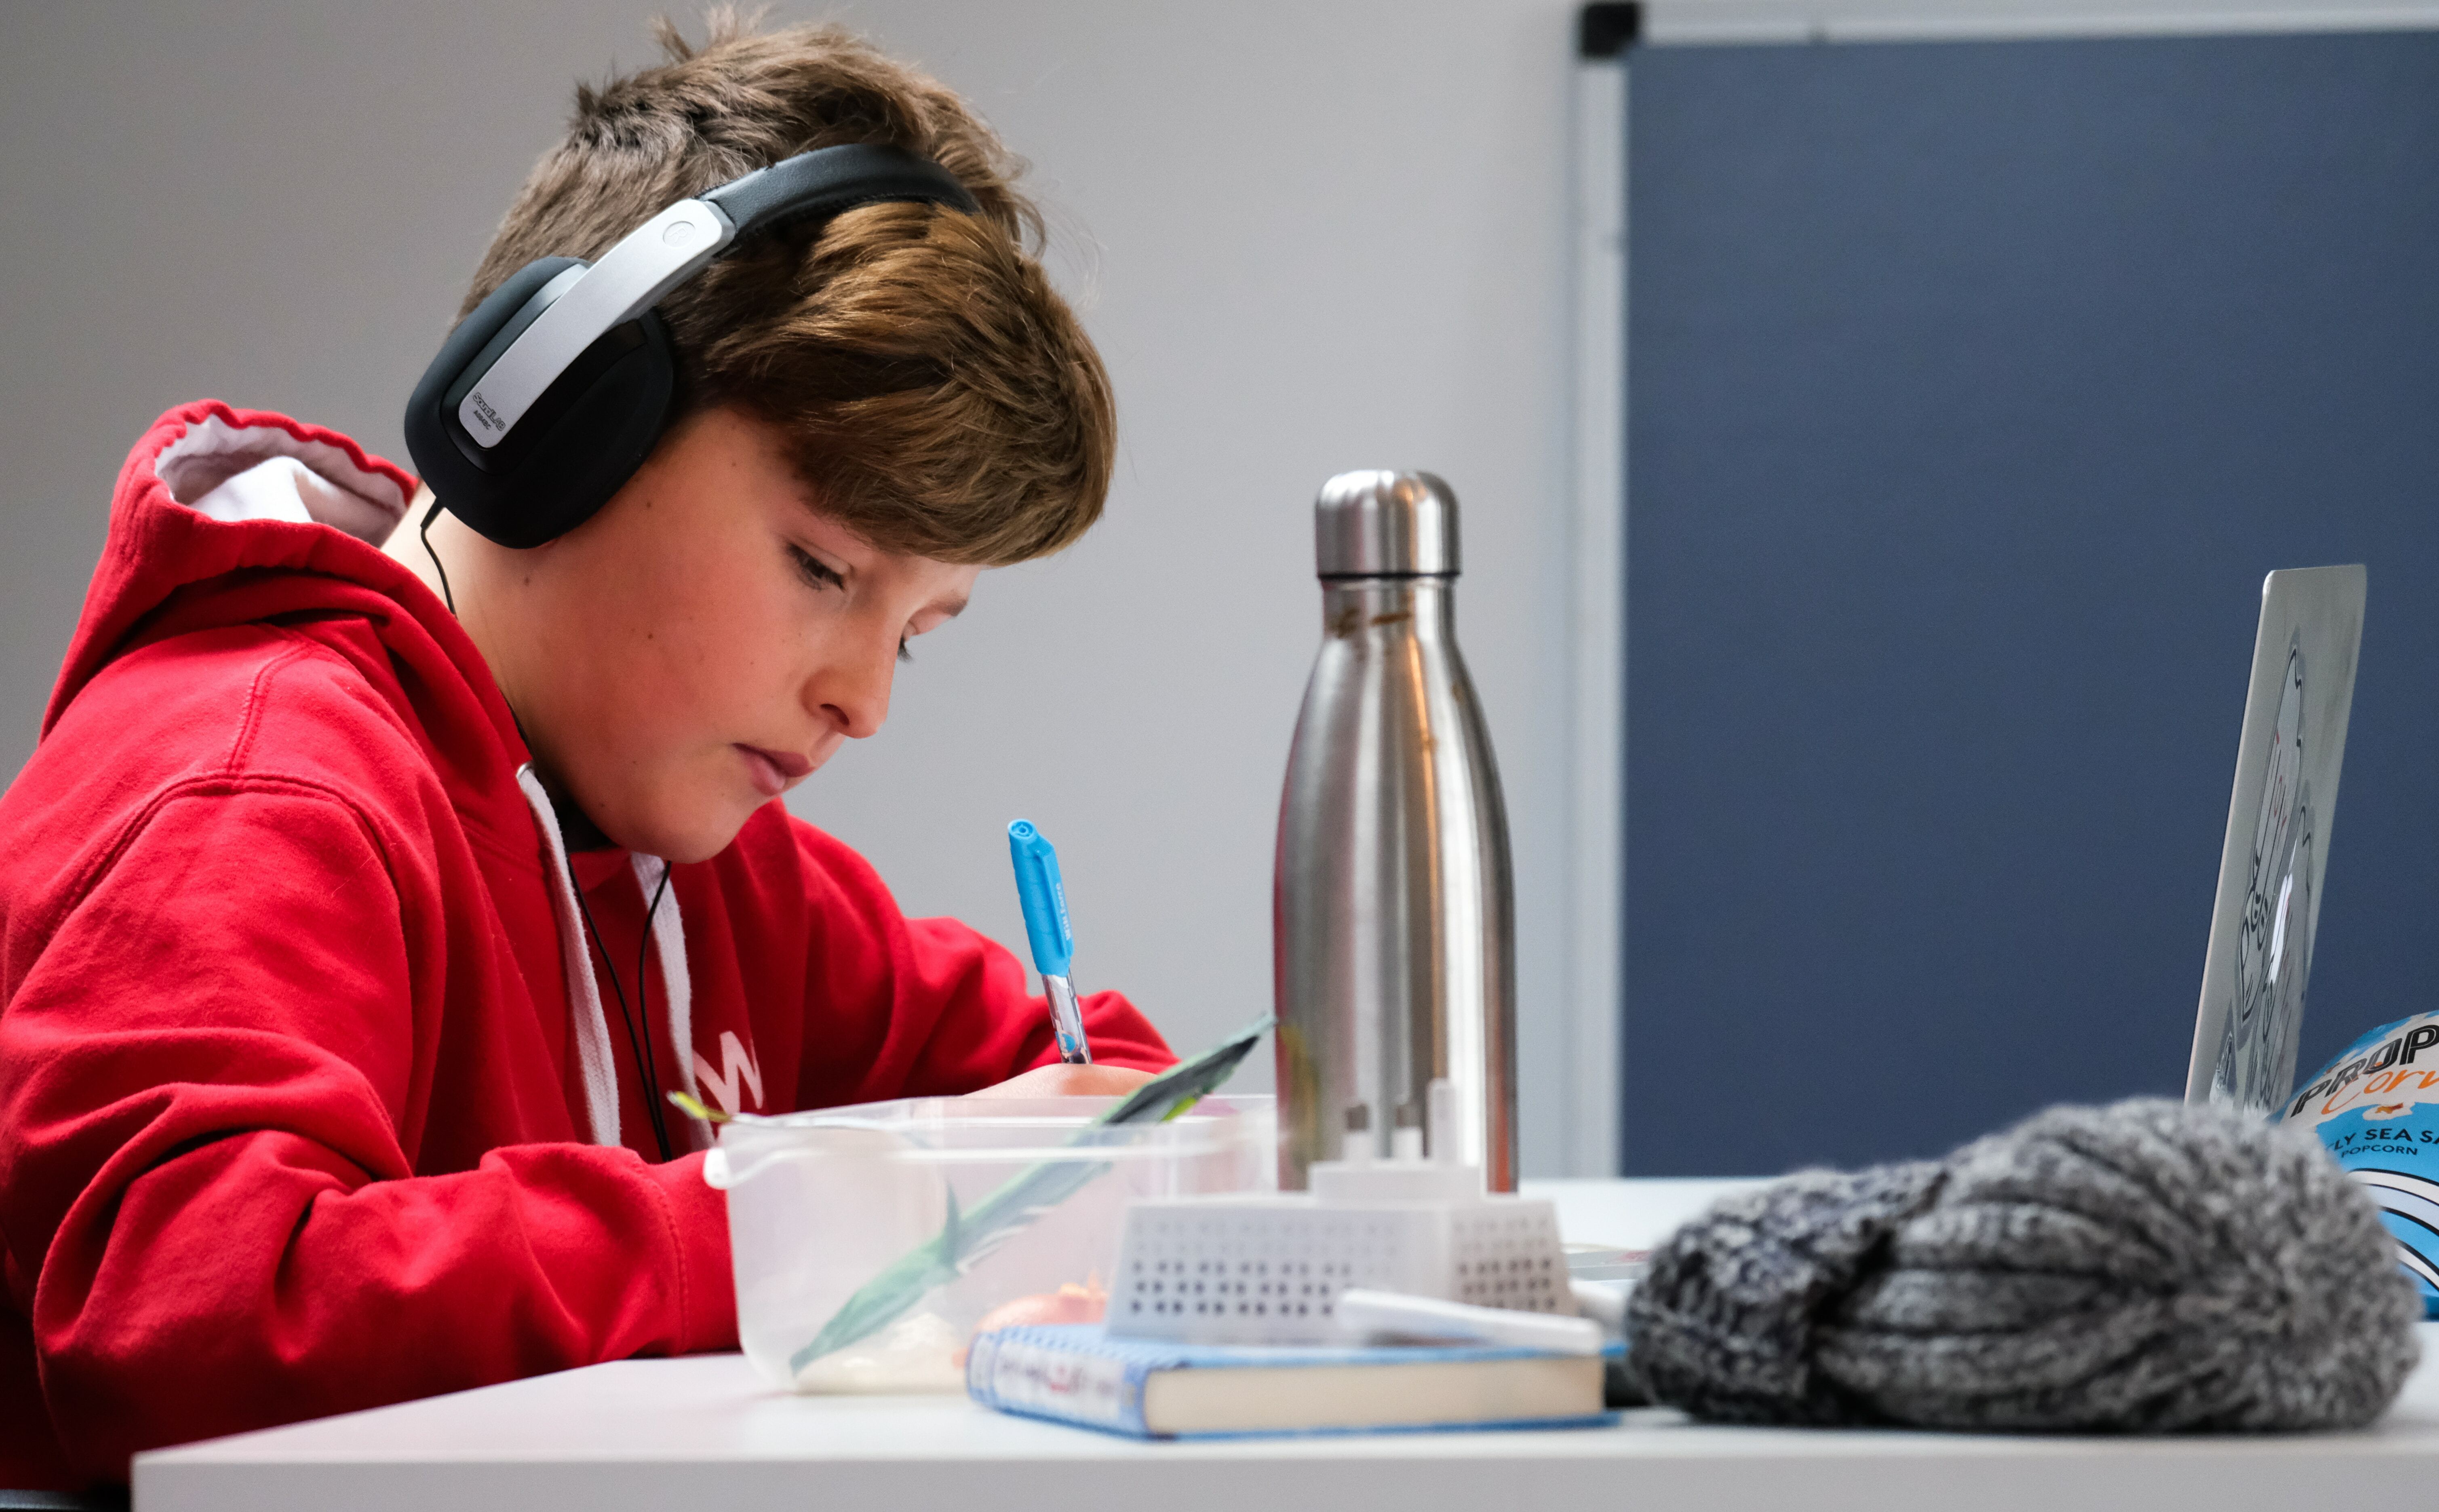 A child wearing a red hoodie writing